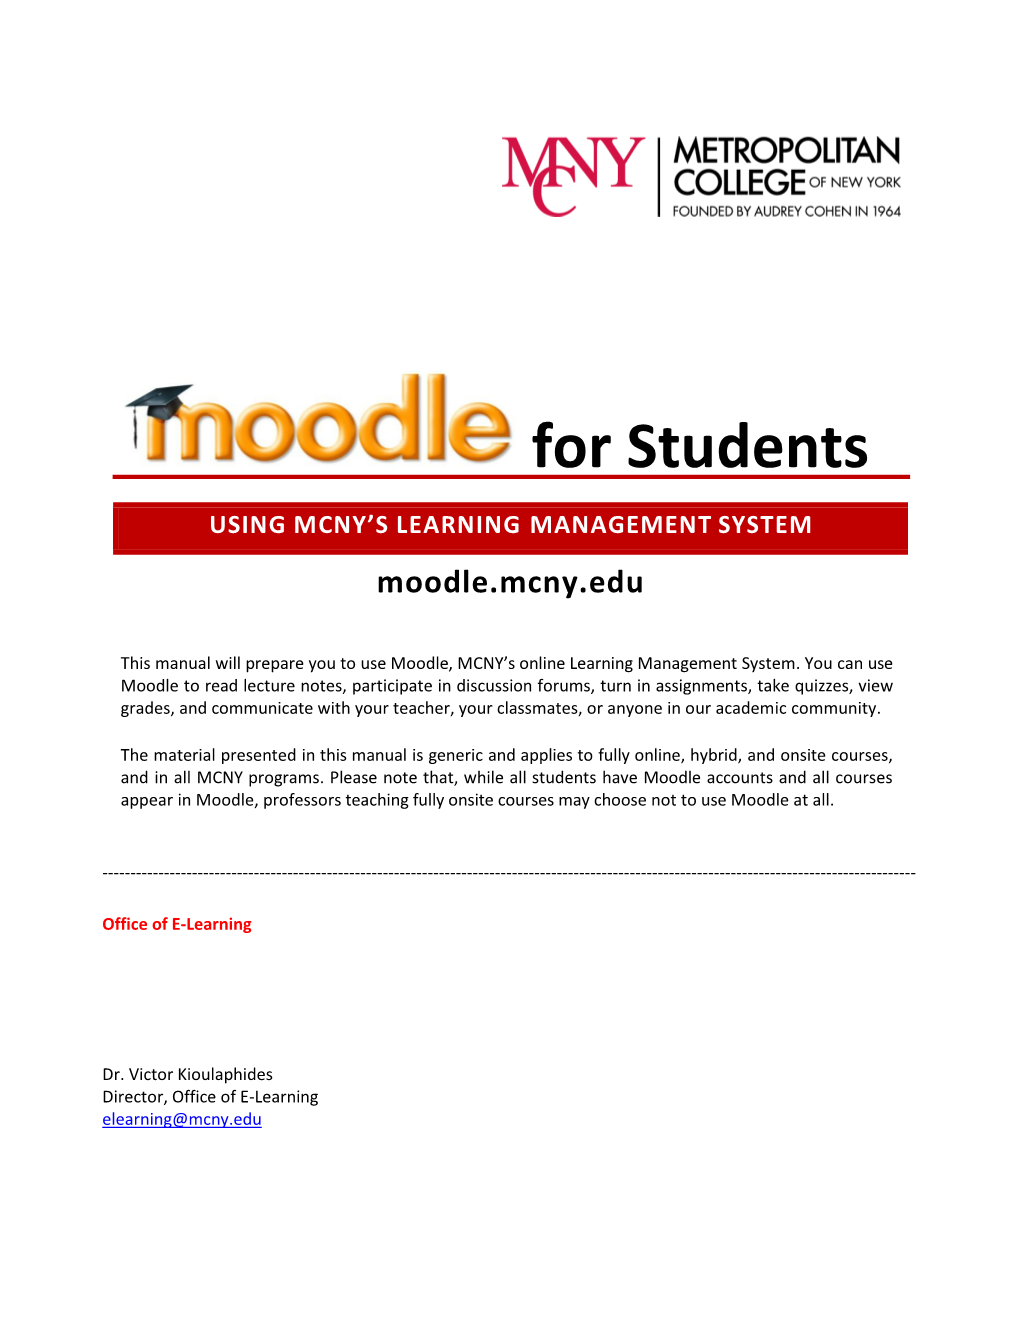 Moodle for Students-Using MCNY's Course Management System